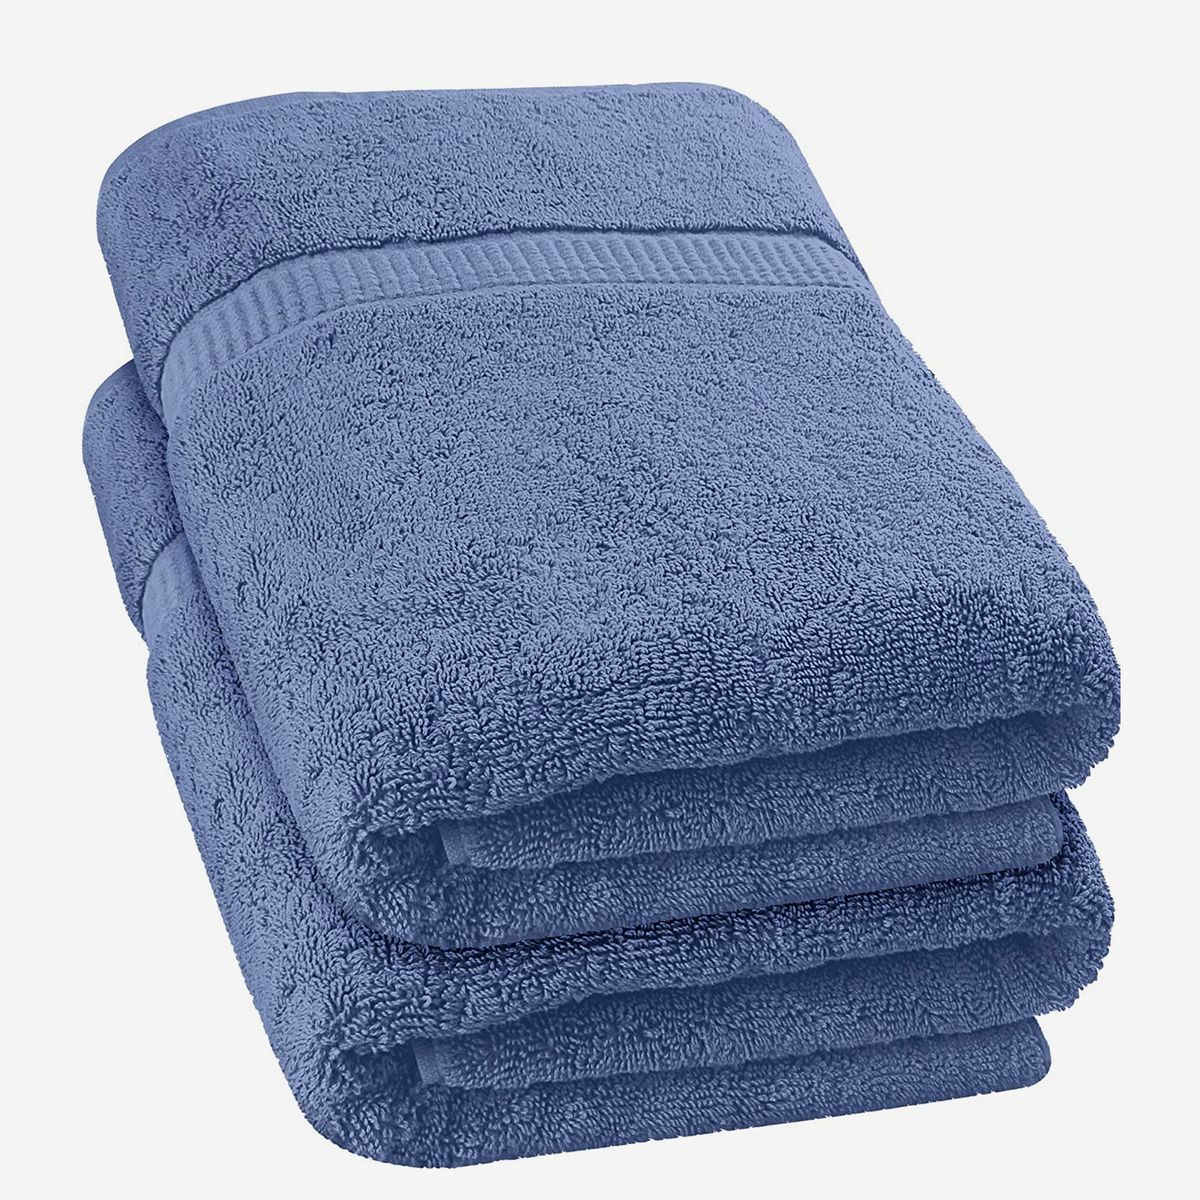 18 Best Bath Towels 2022 | The Strategist